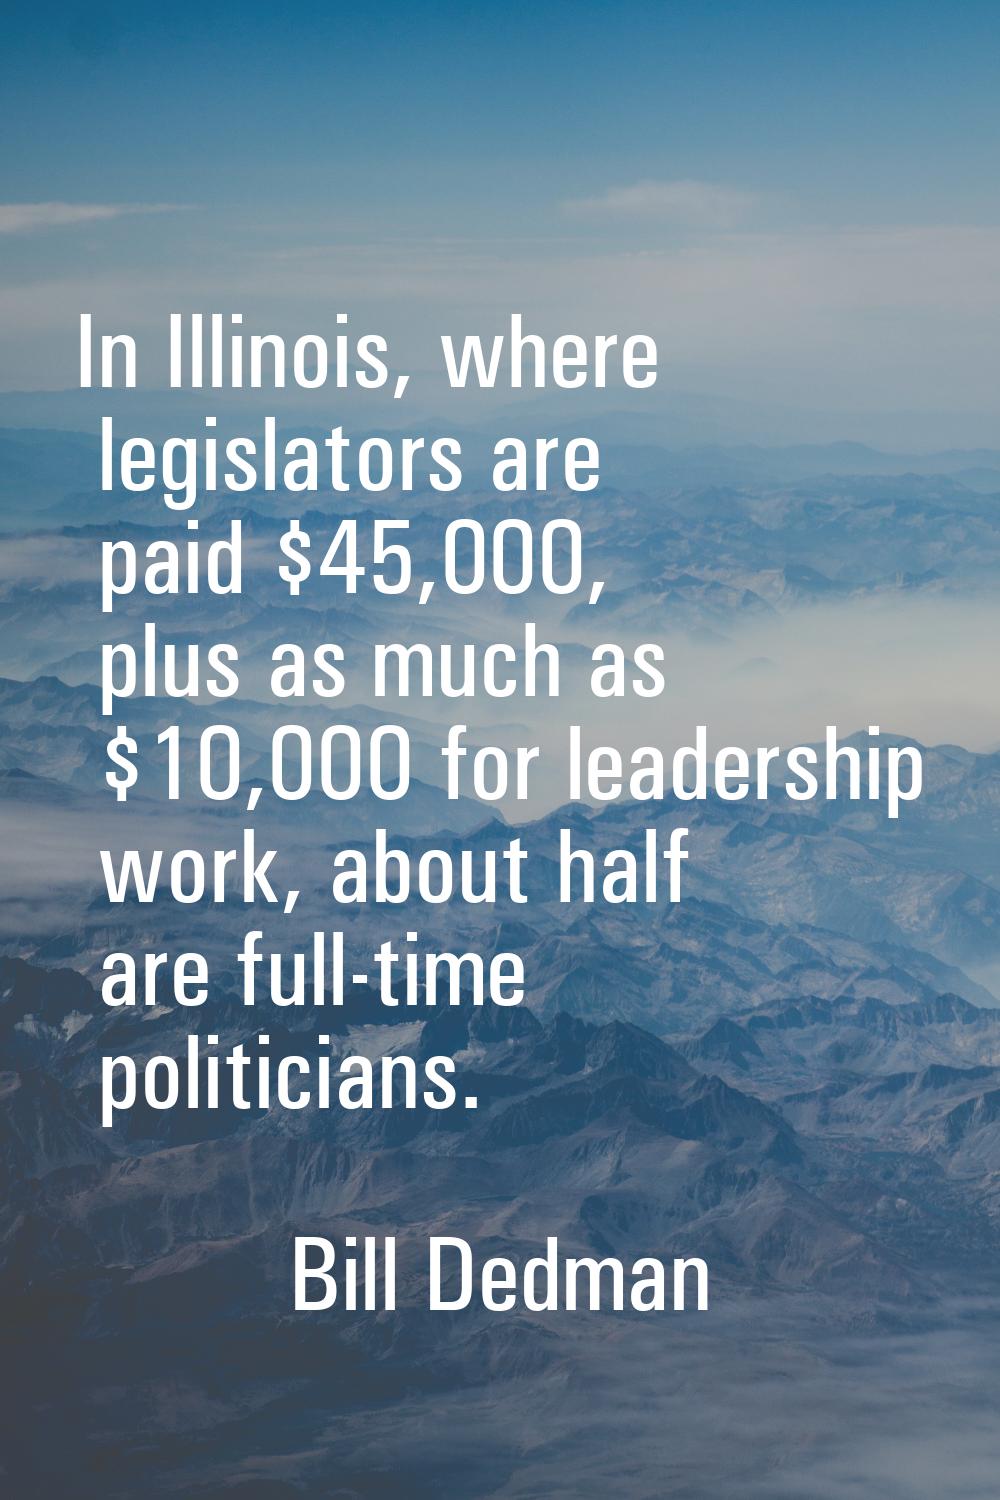 In Illinois, where legislators are paid $45,000, plus as much as $10,000 for leadership work, about